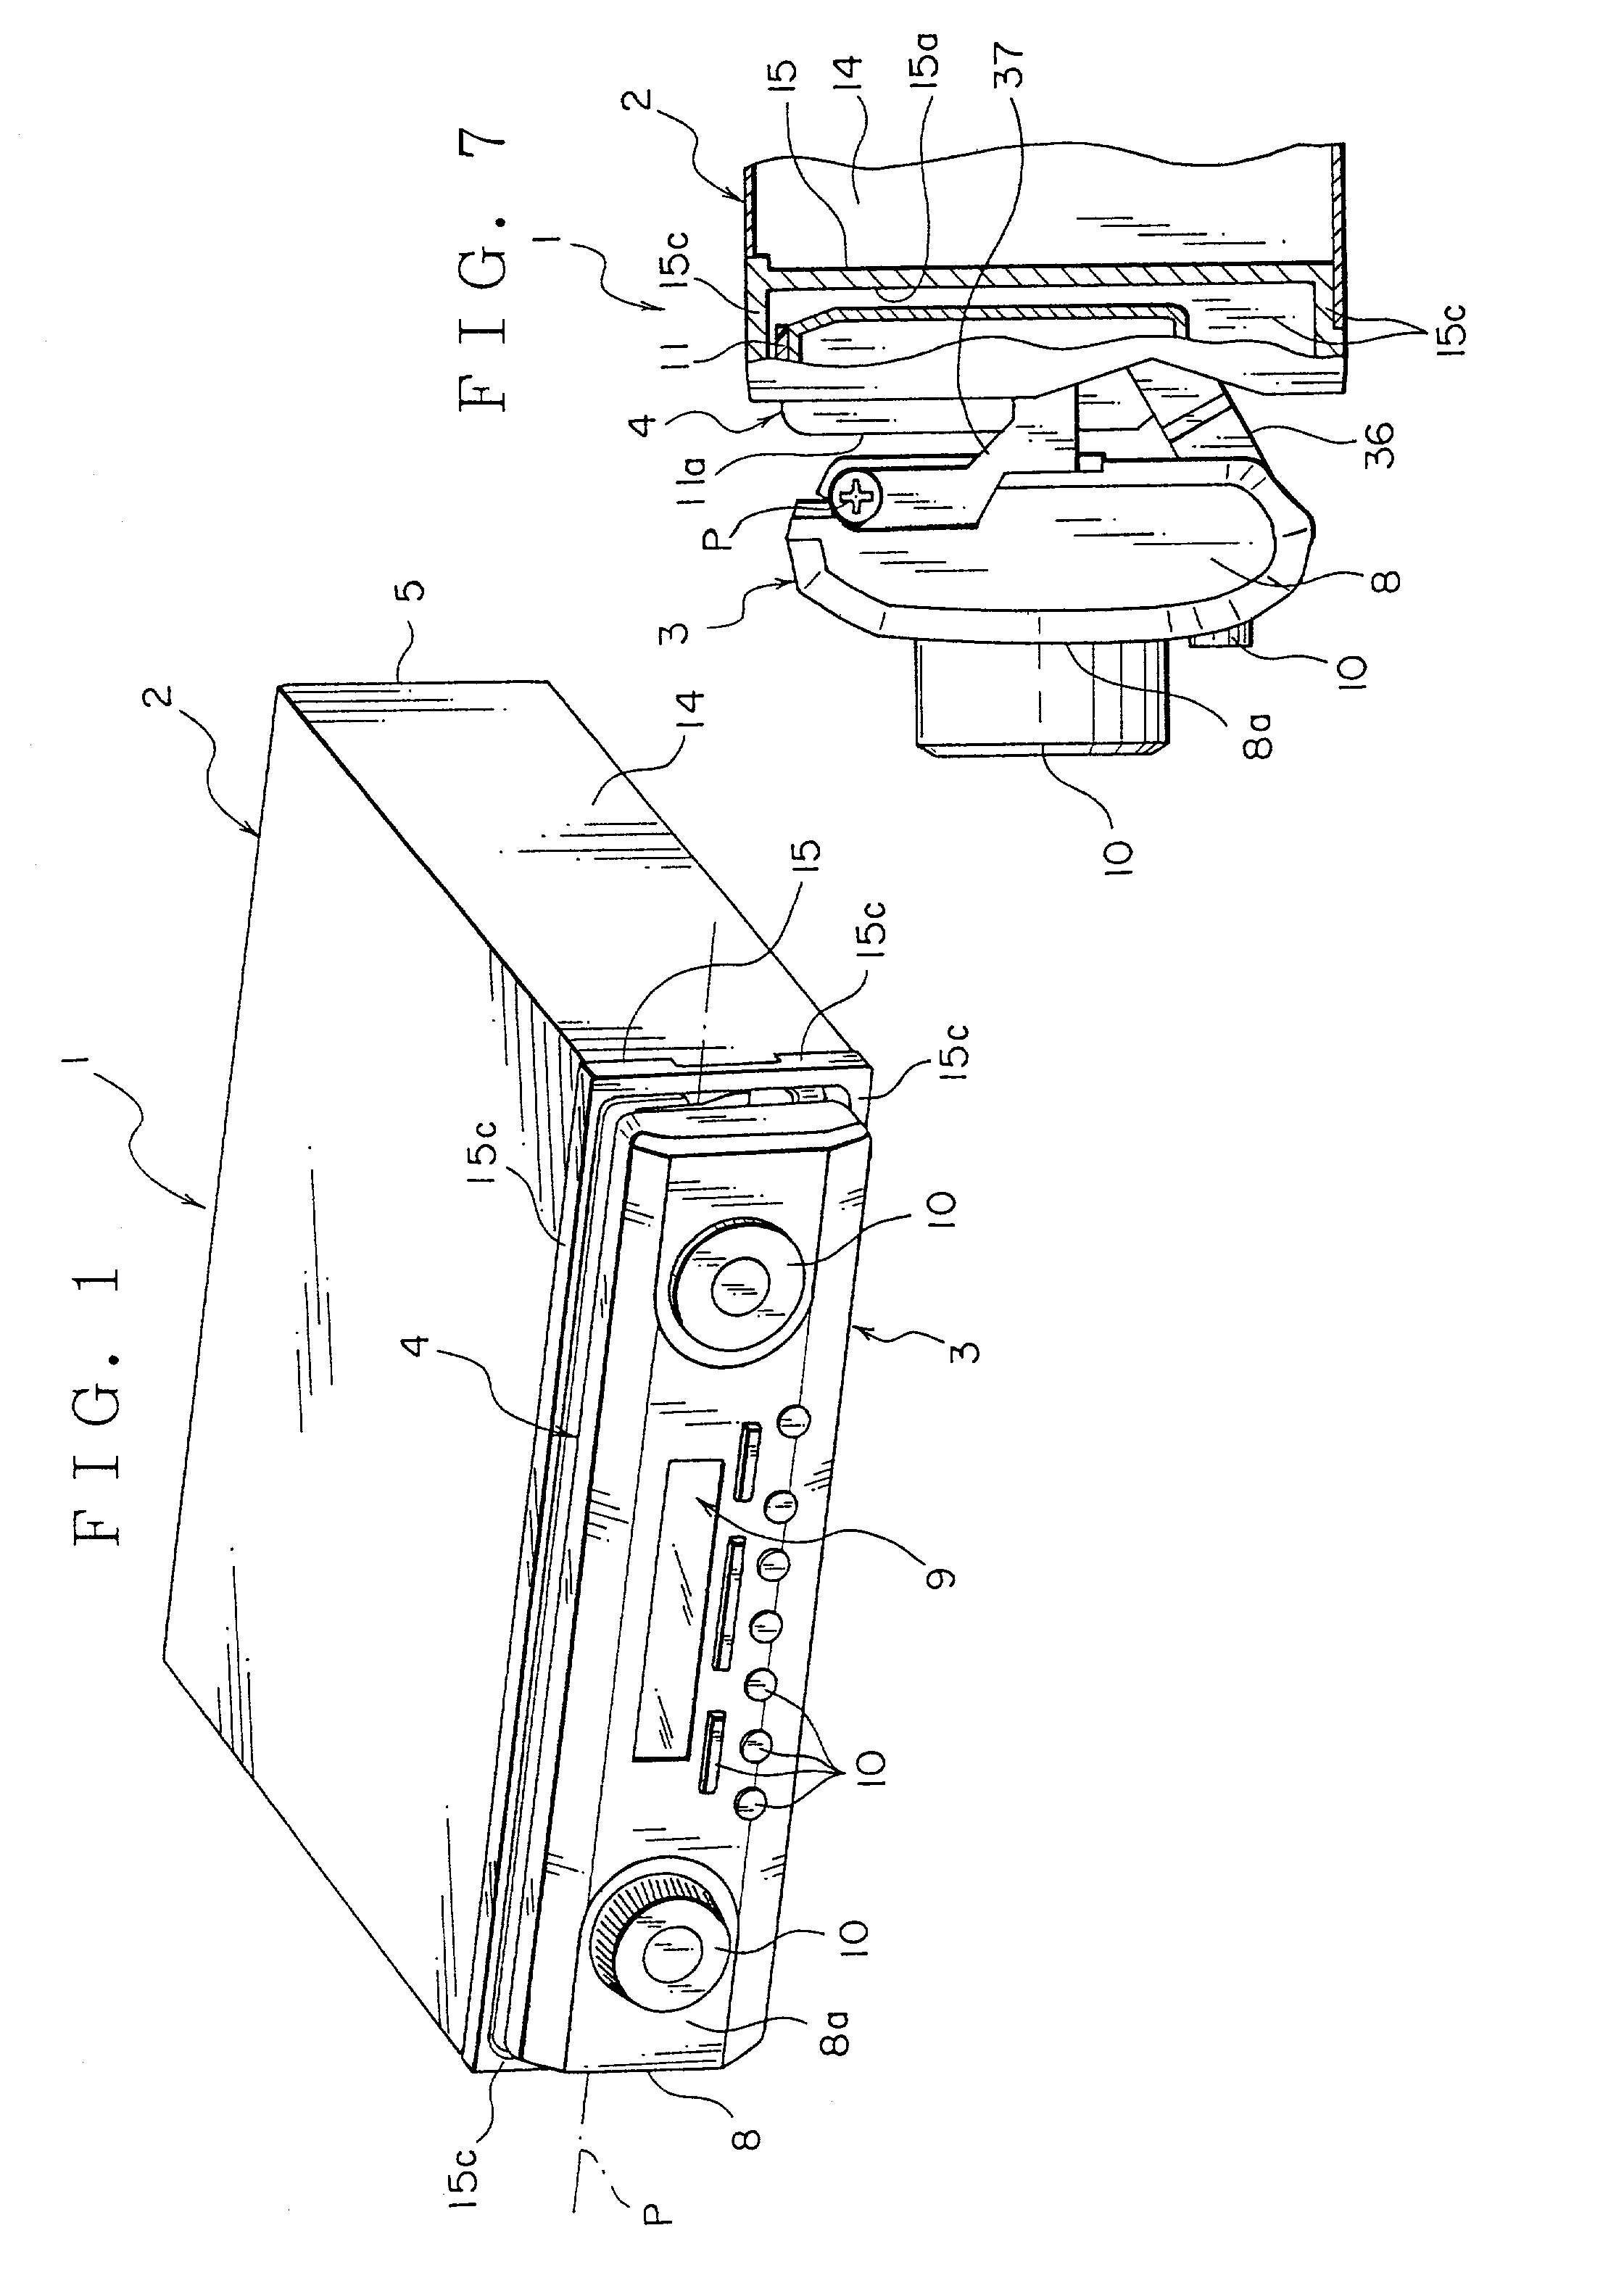 Electronic instrument having first and second operation units